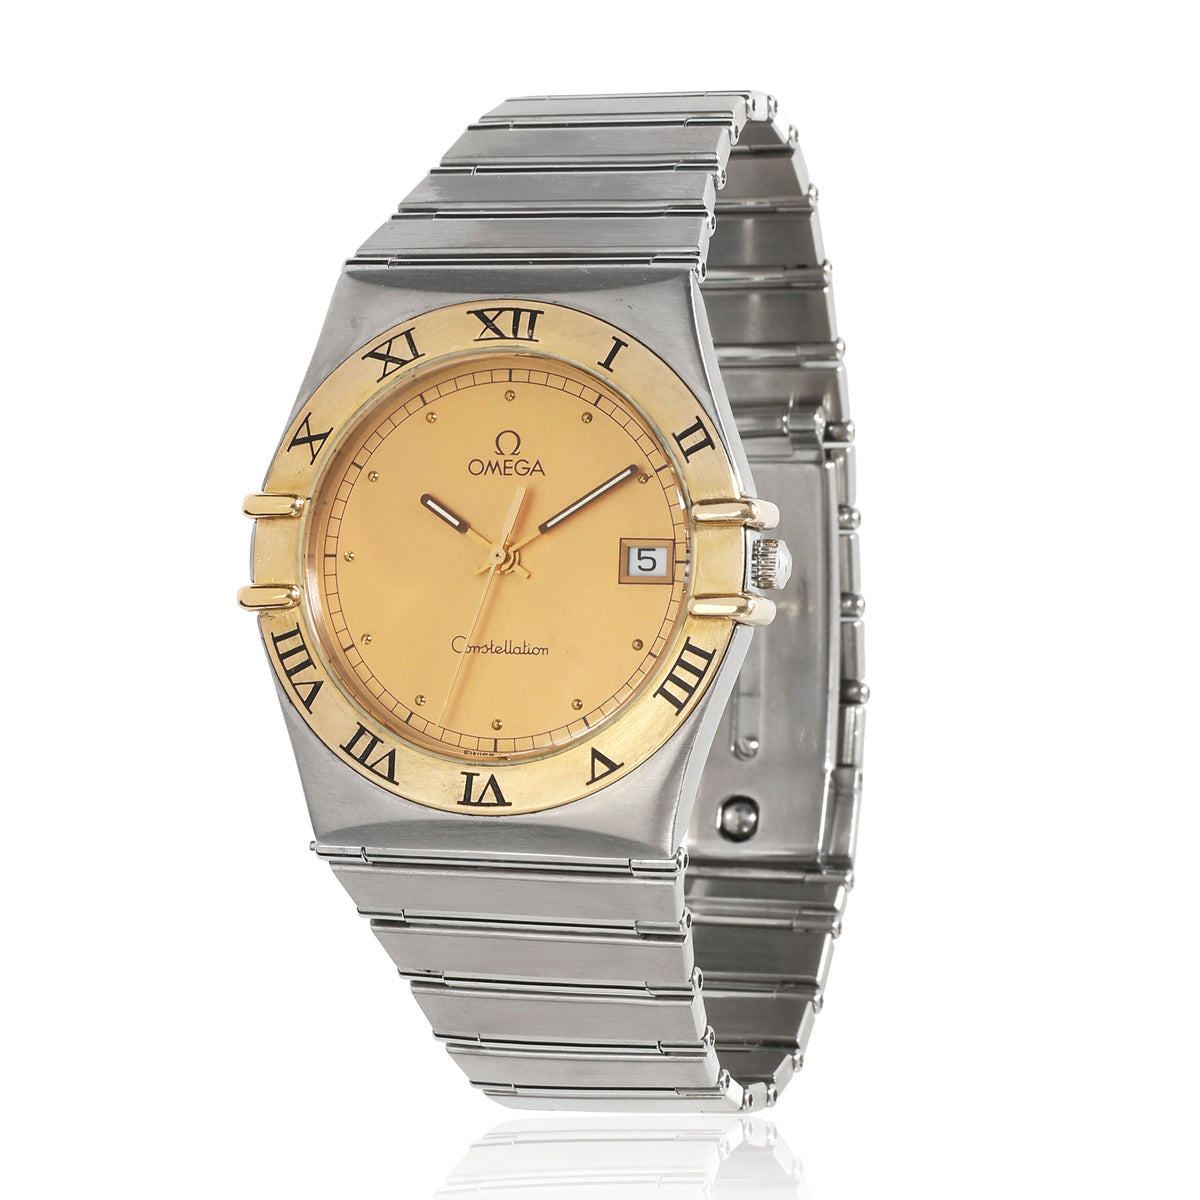 Omega Constellation 1210.10.00 Men's Watch in 18kt Stainless Steel/Yellow Gold